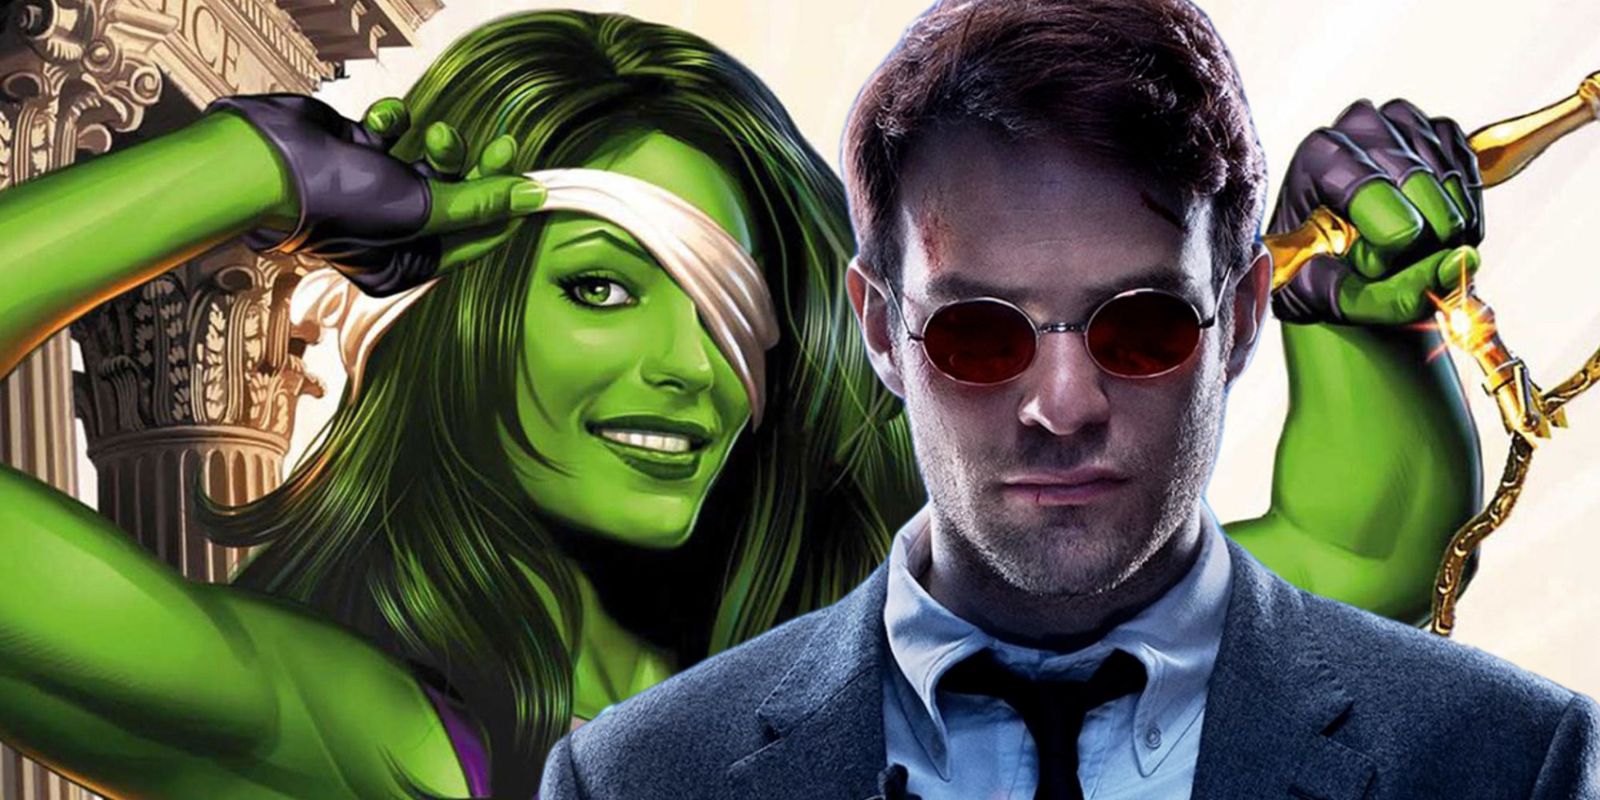 Who is the best lawyer between She Hulk and Daredevil? - Quora